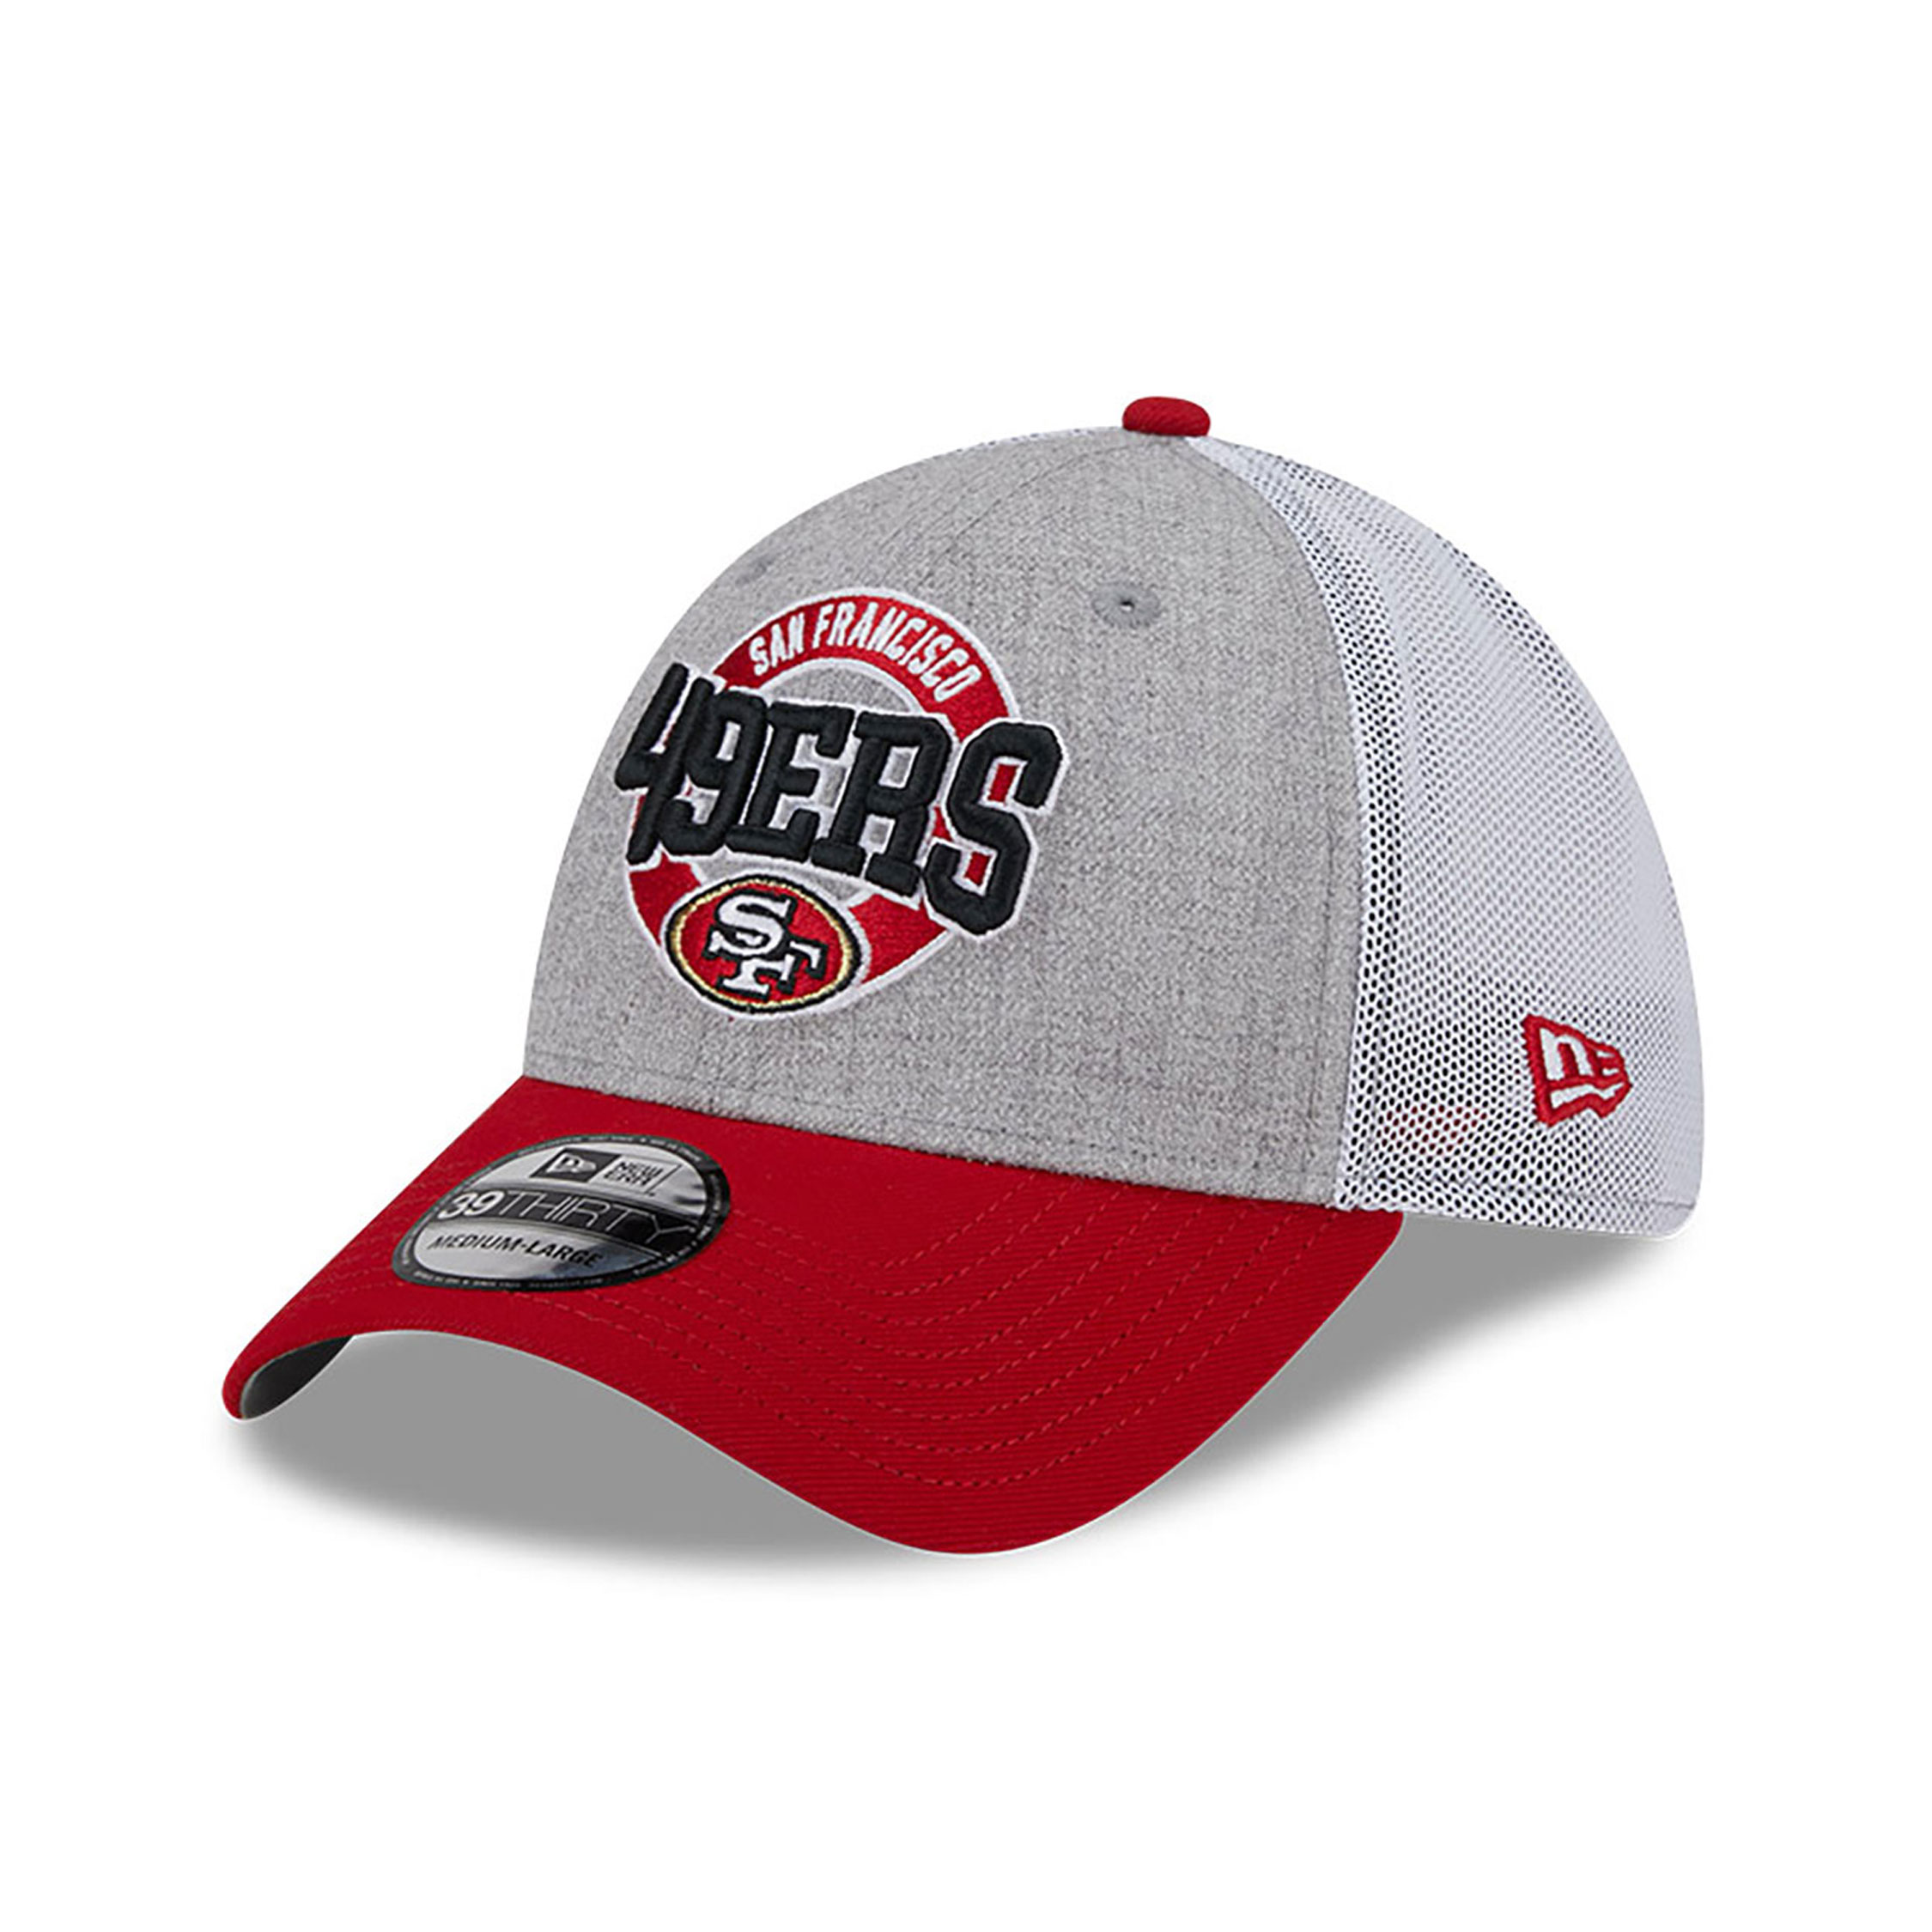 49ers 39thirty hat